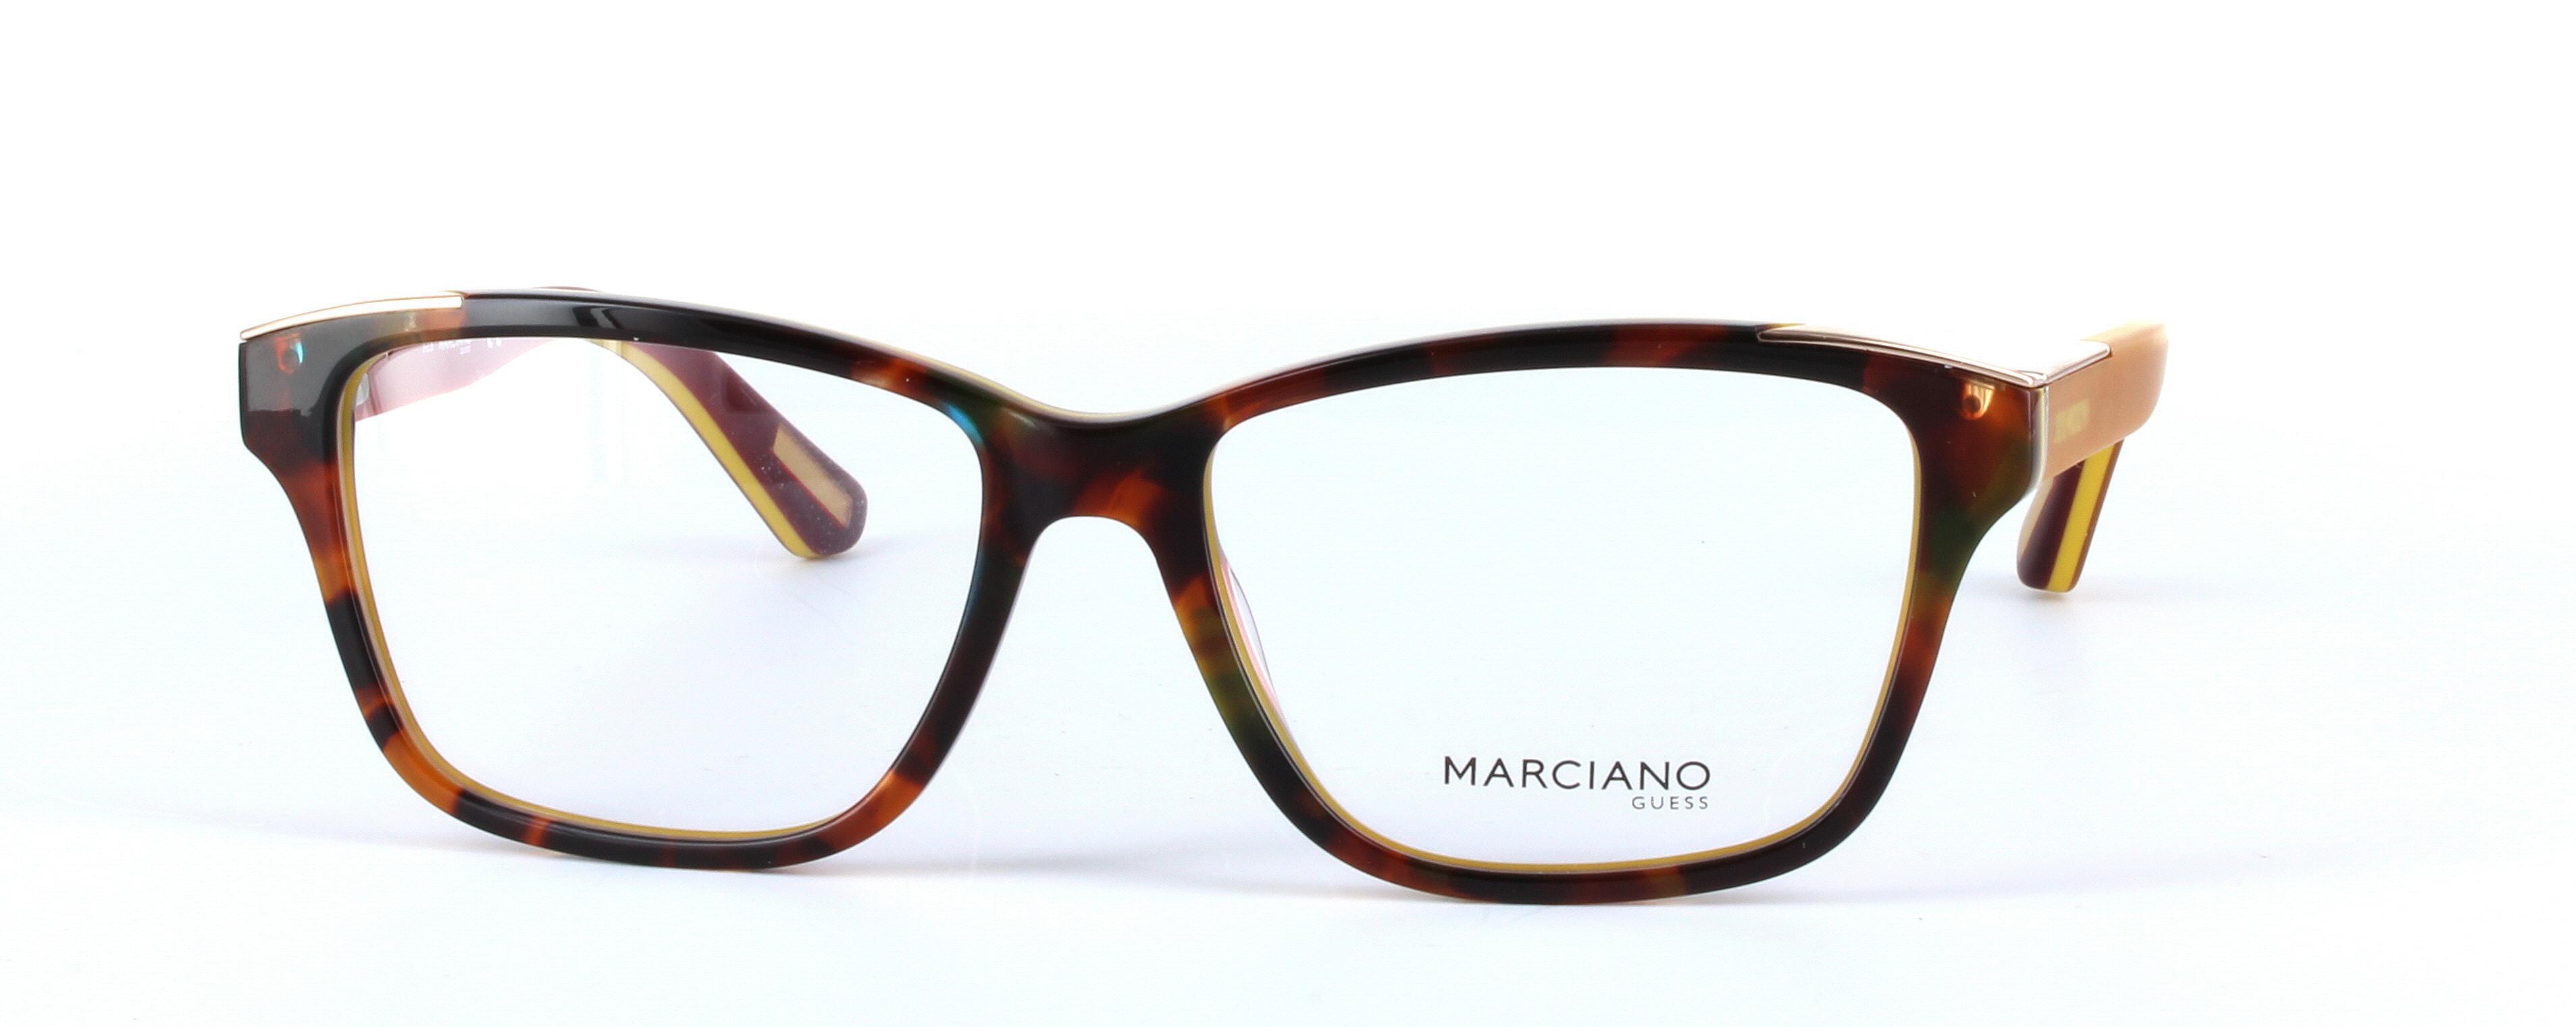 GUESS MARCIANO (GM0300-054) Tortoise Full Rim Oval Rectangular Acetate Glasses - Image View 5